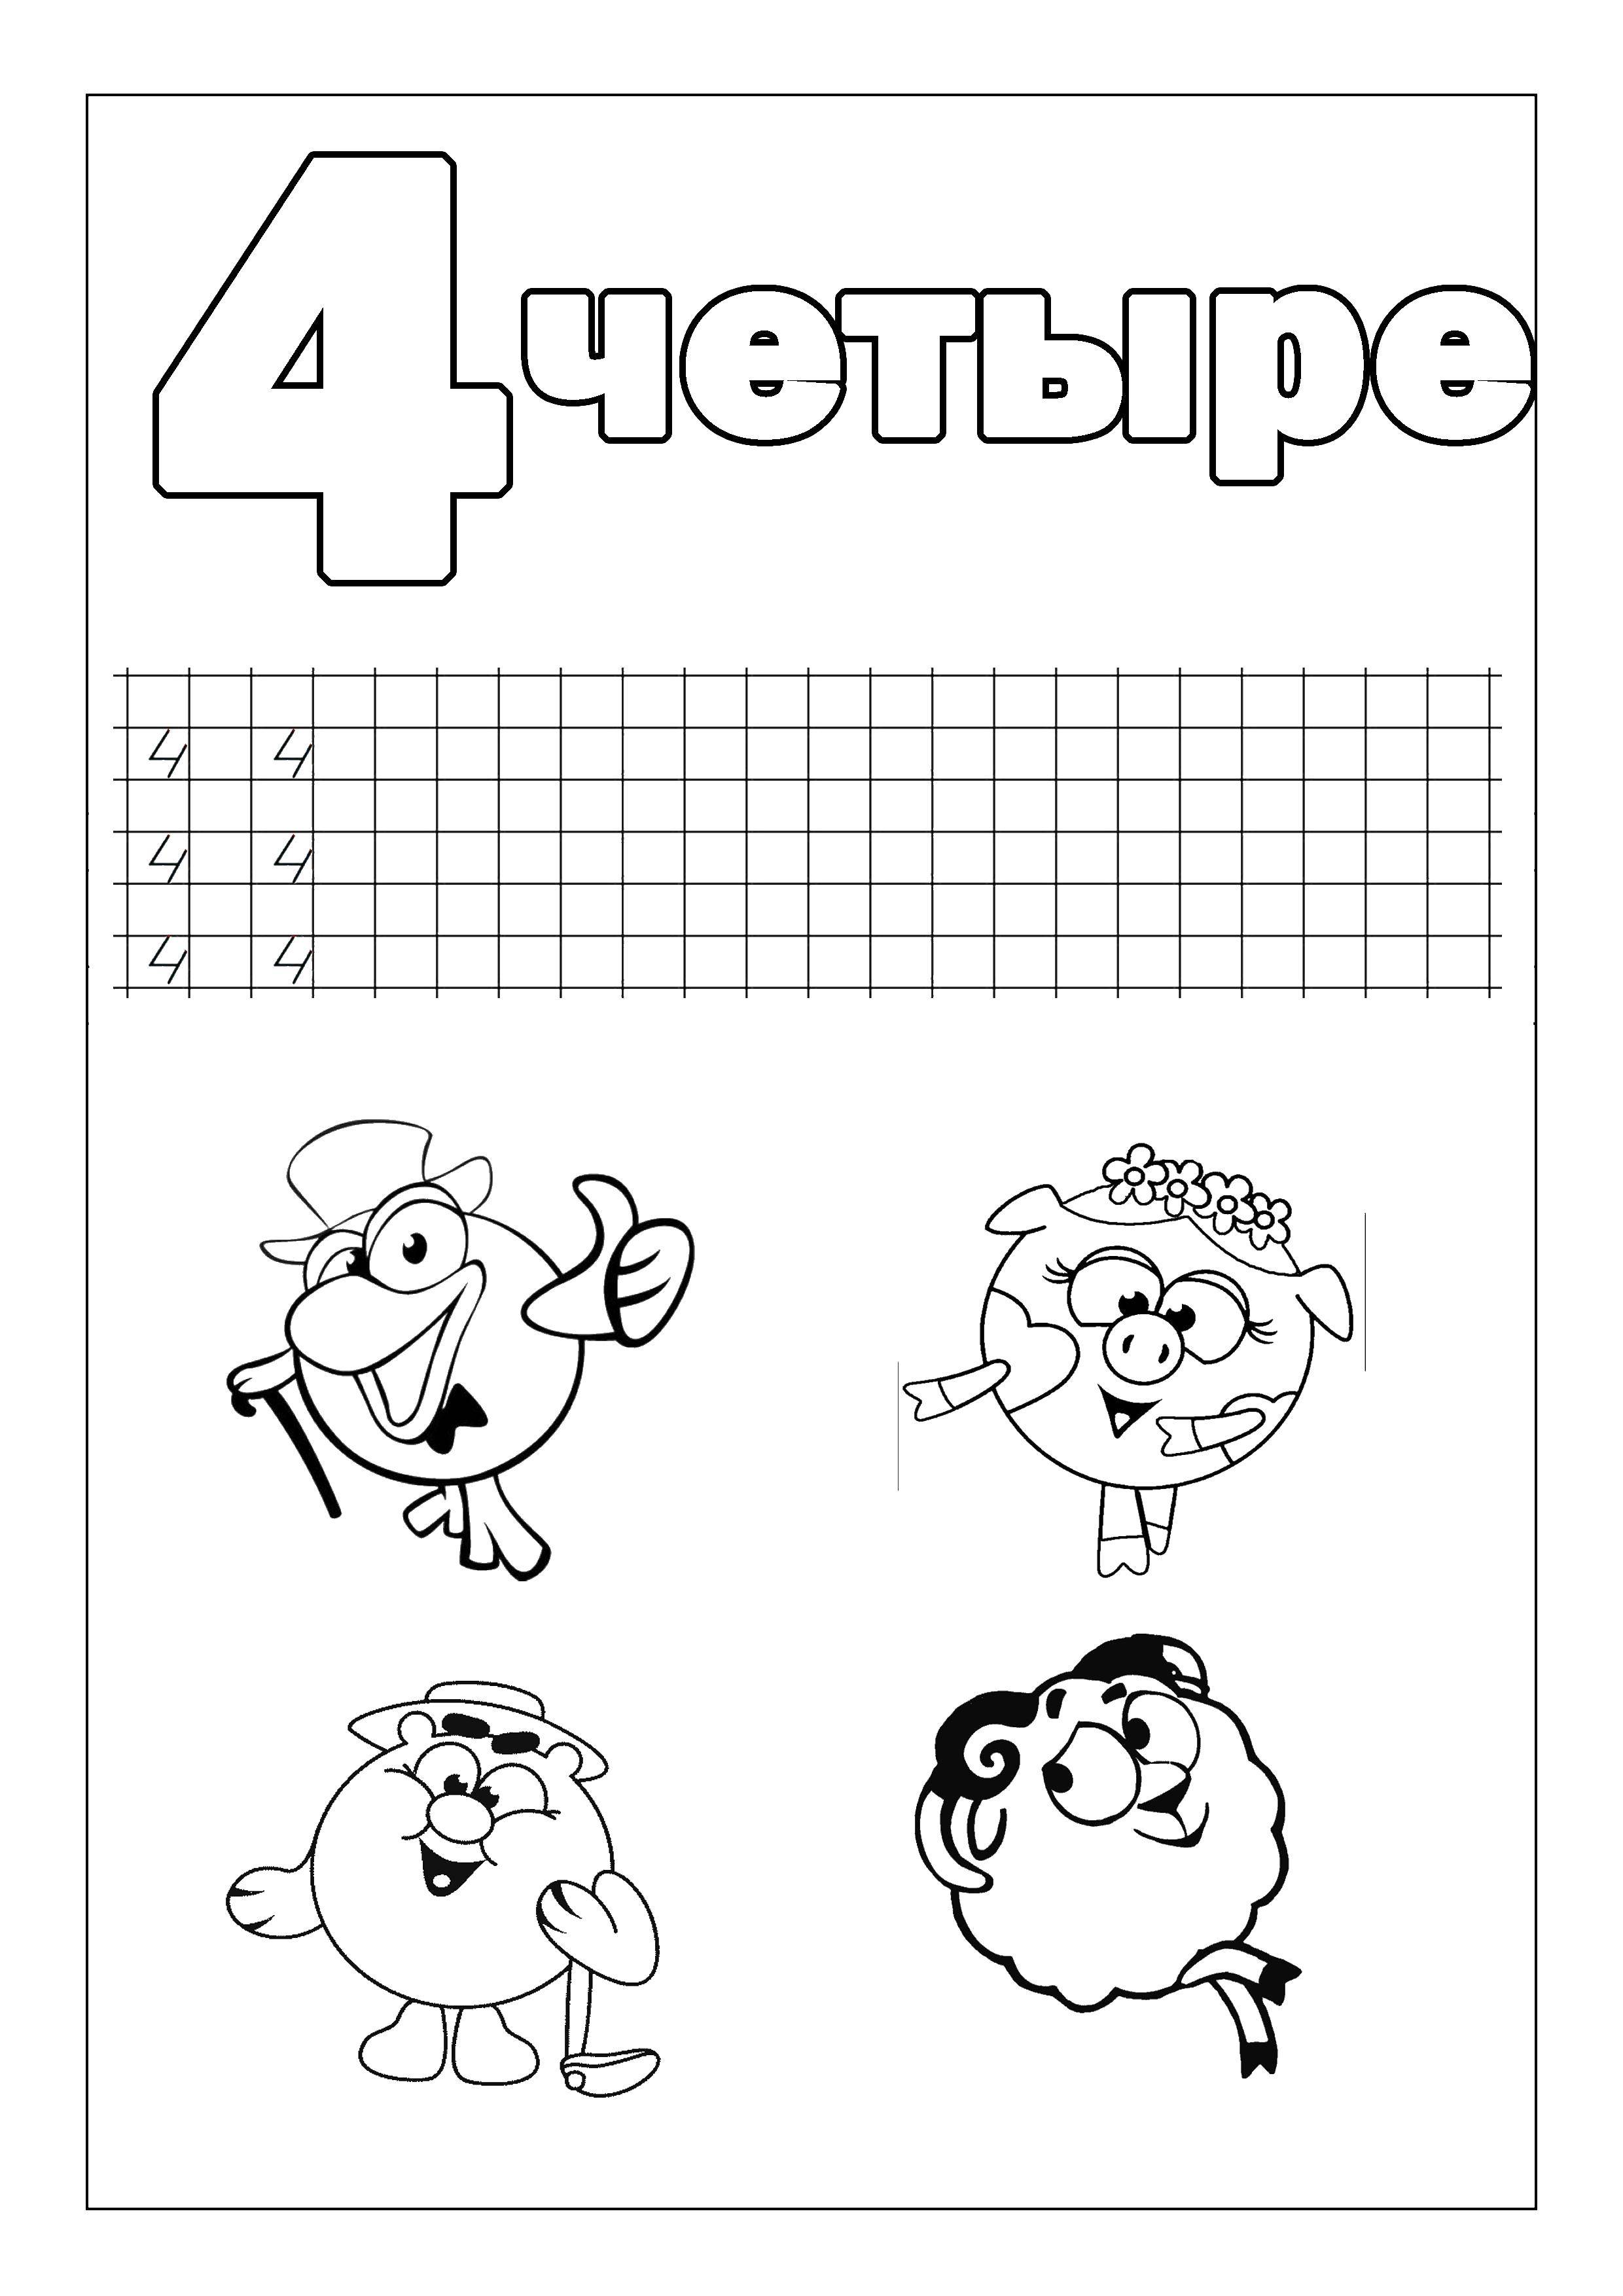 Coloring Recipe number 4. Category tracing numbers. Tags:  the recipe, 4, numbers, animals.